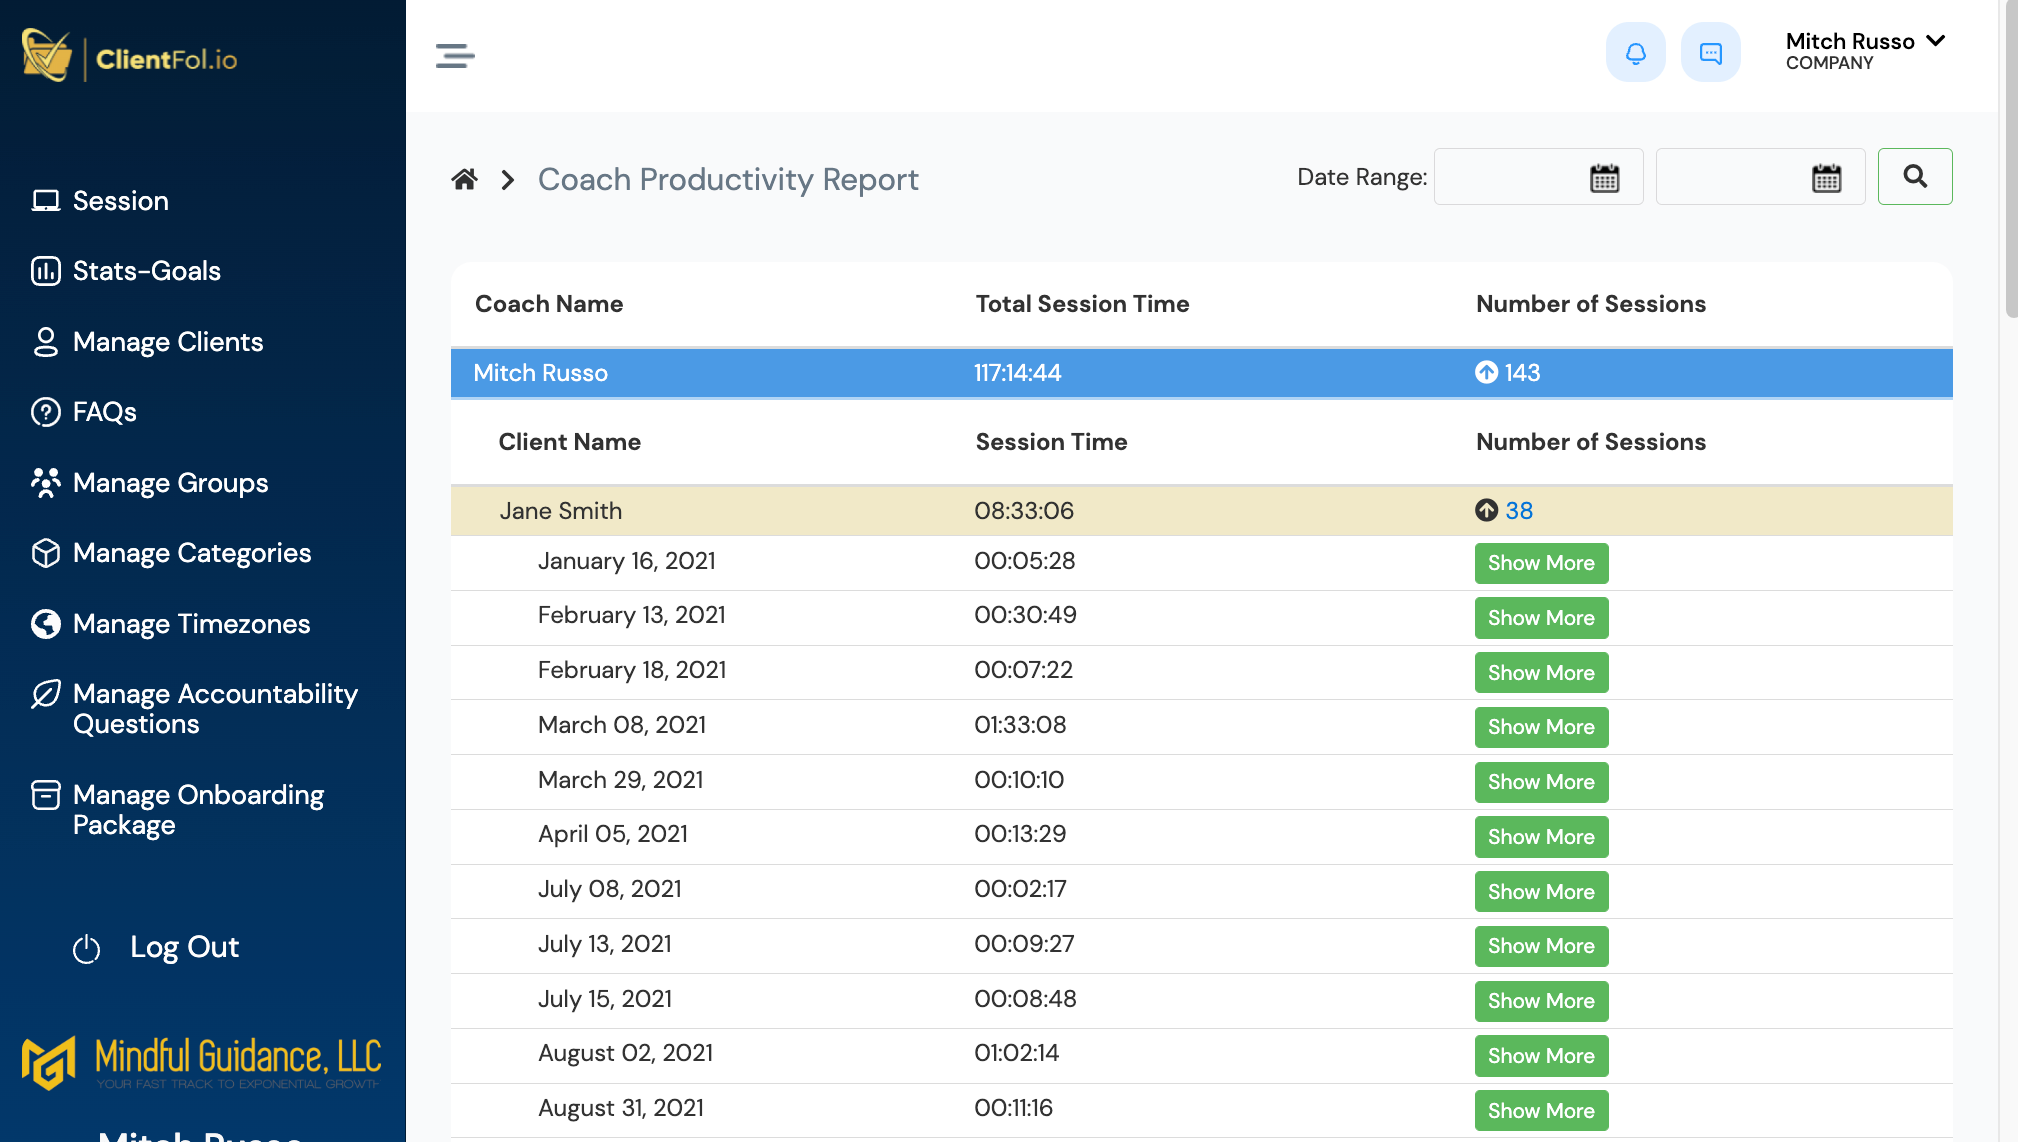 Running a org with multiple coaches? This report lets you audit the productivity of all coaches, showing date/time of every session and the ability to see all homework sent to each of their clients. All this is included free with your subscription.